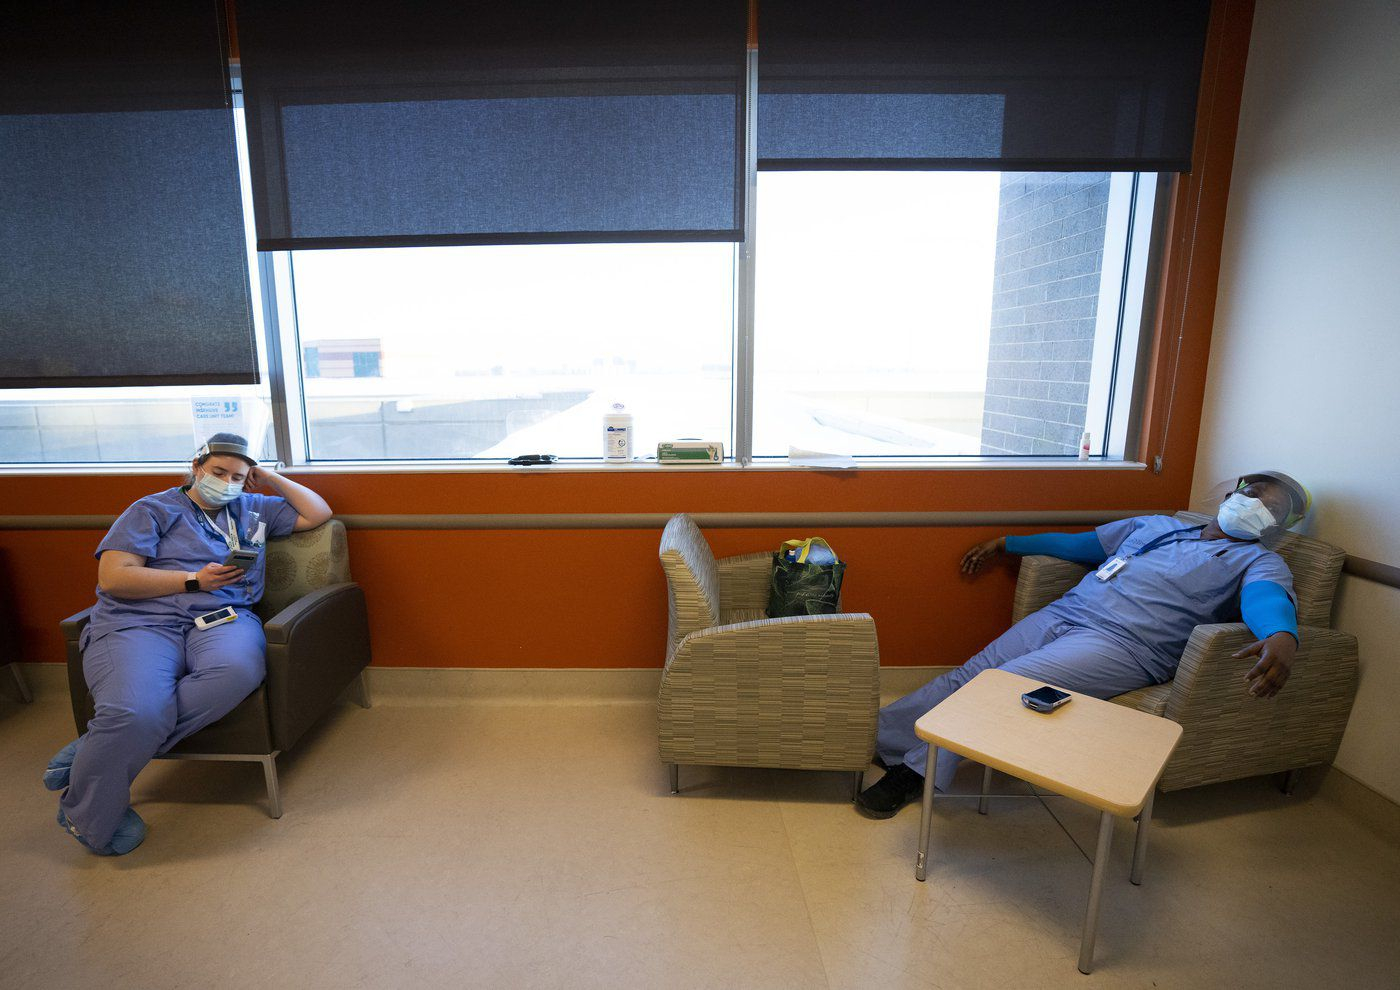 Rethinking a Healthcare Waiting Room